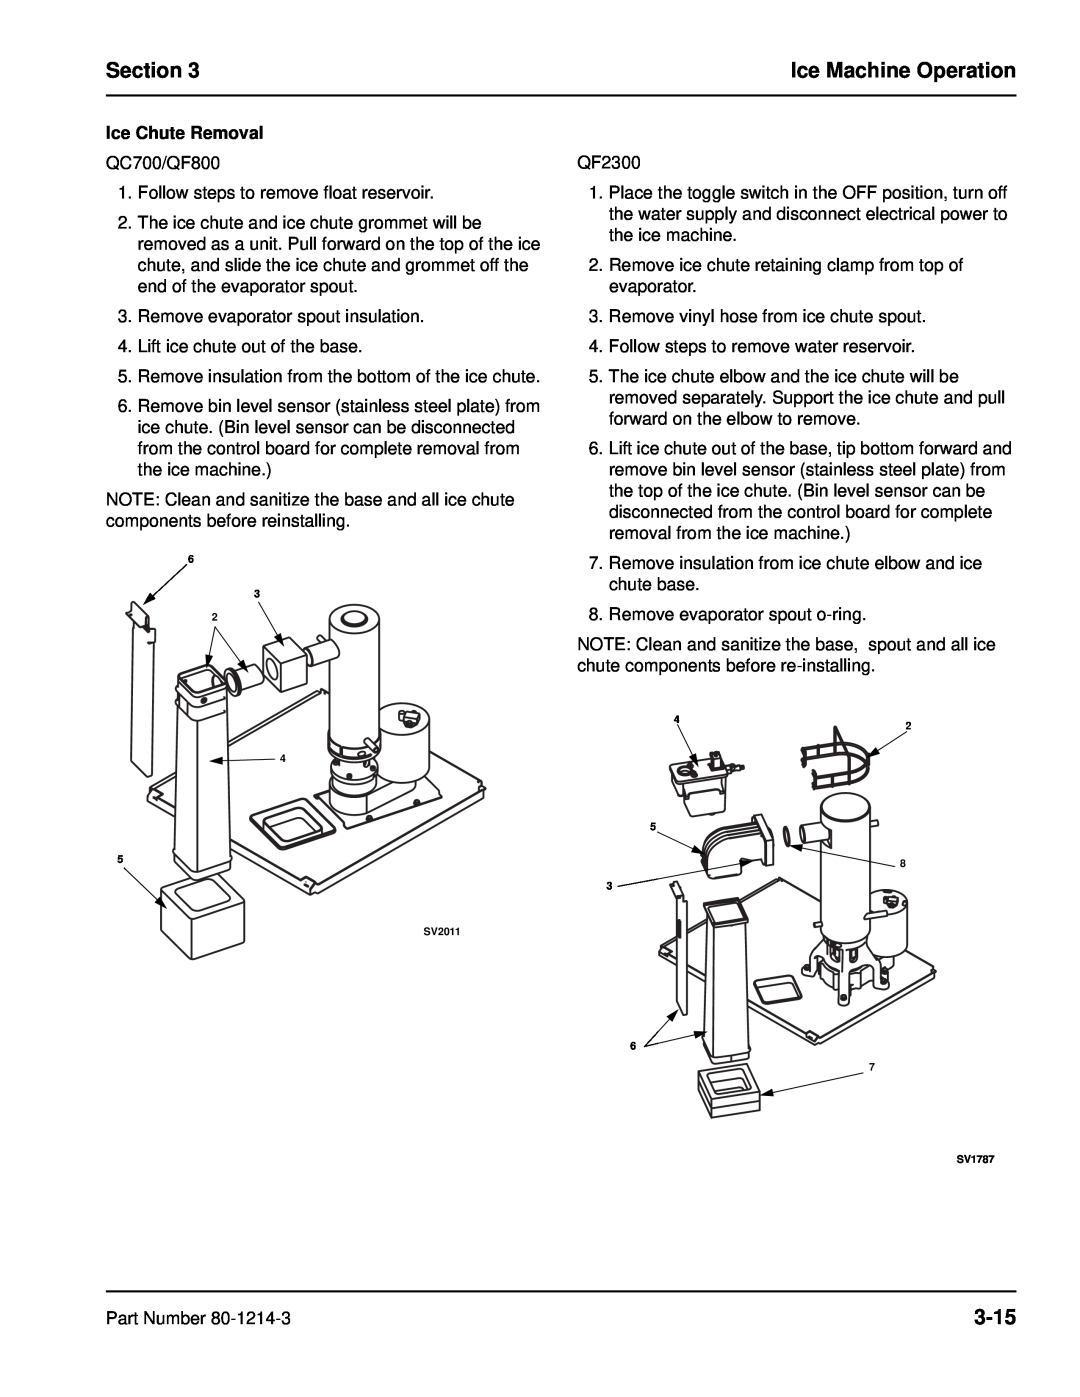 Manitowoc Ice QF2300, QF0800, QC0700, QF0400, QF2200 service manual Section, Ice Machine Operation, 3-15, Ice Chute Removal 